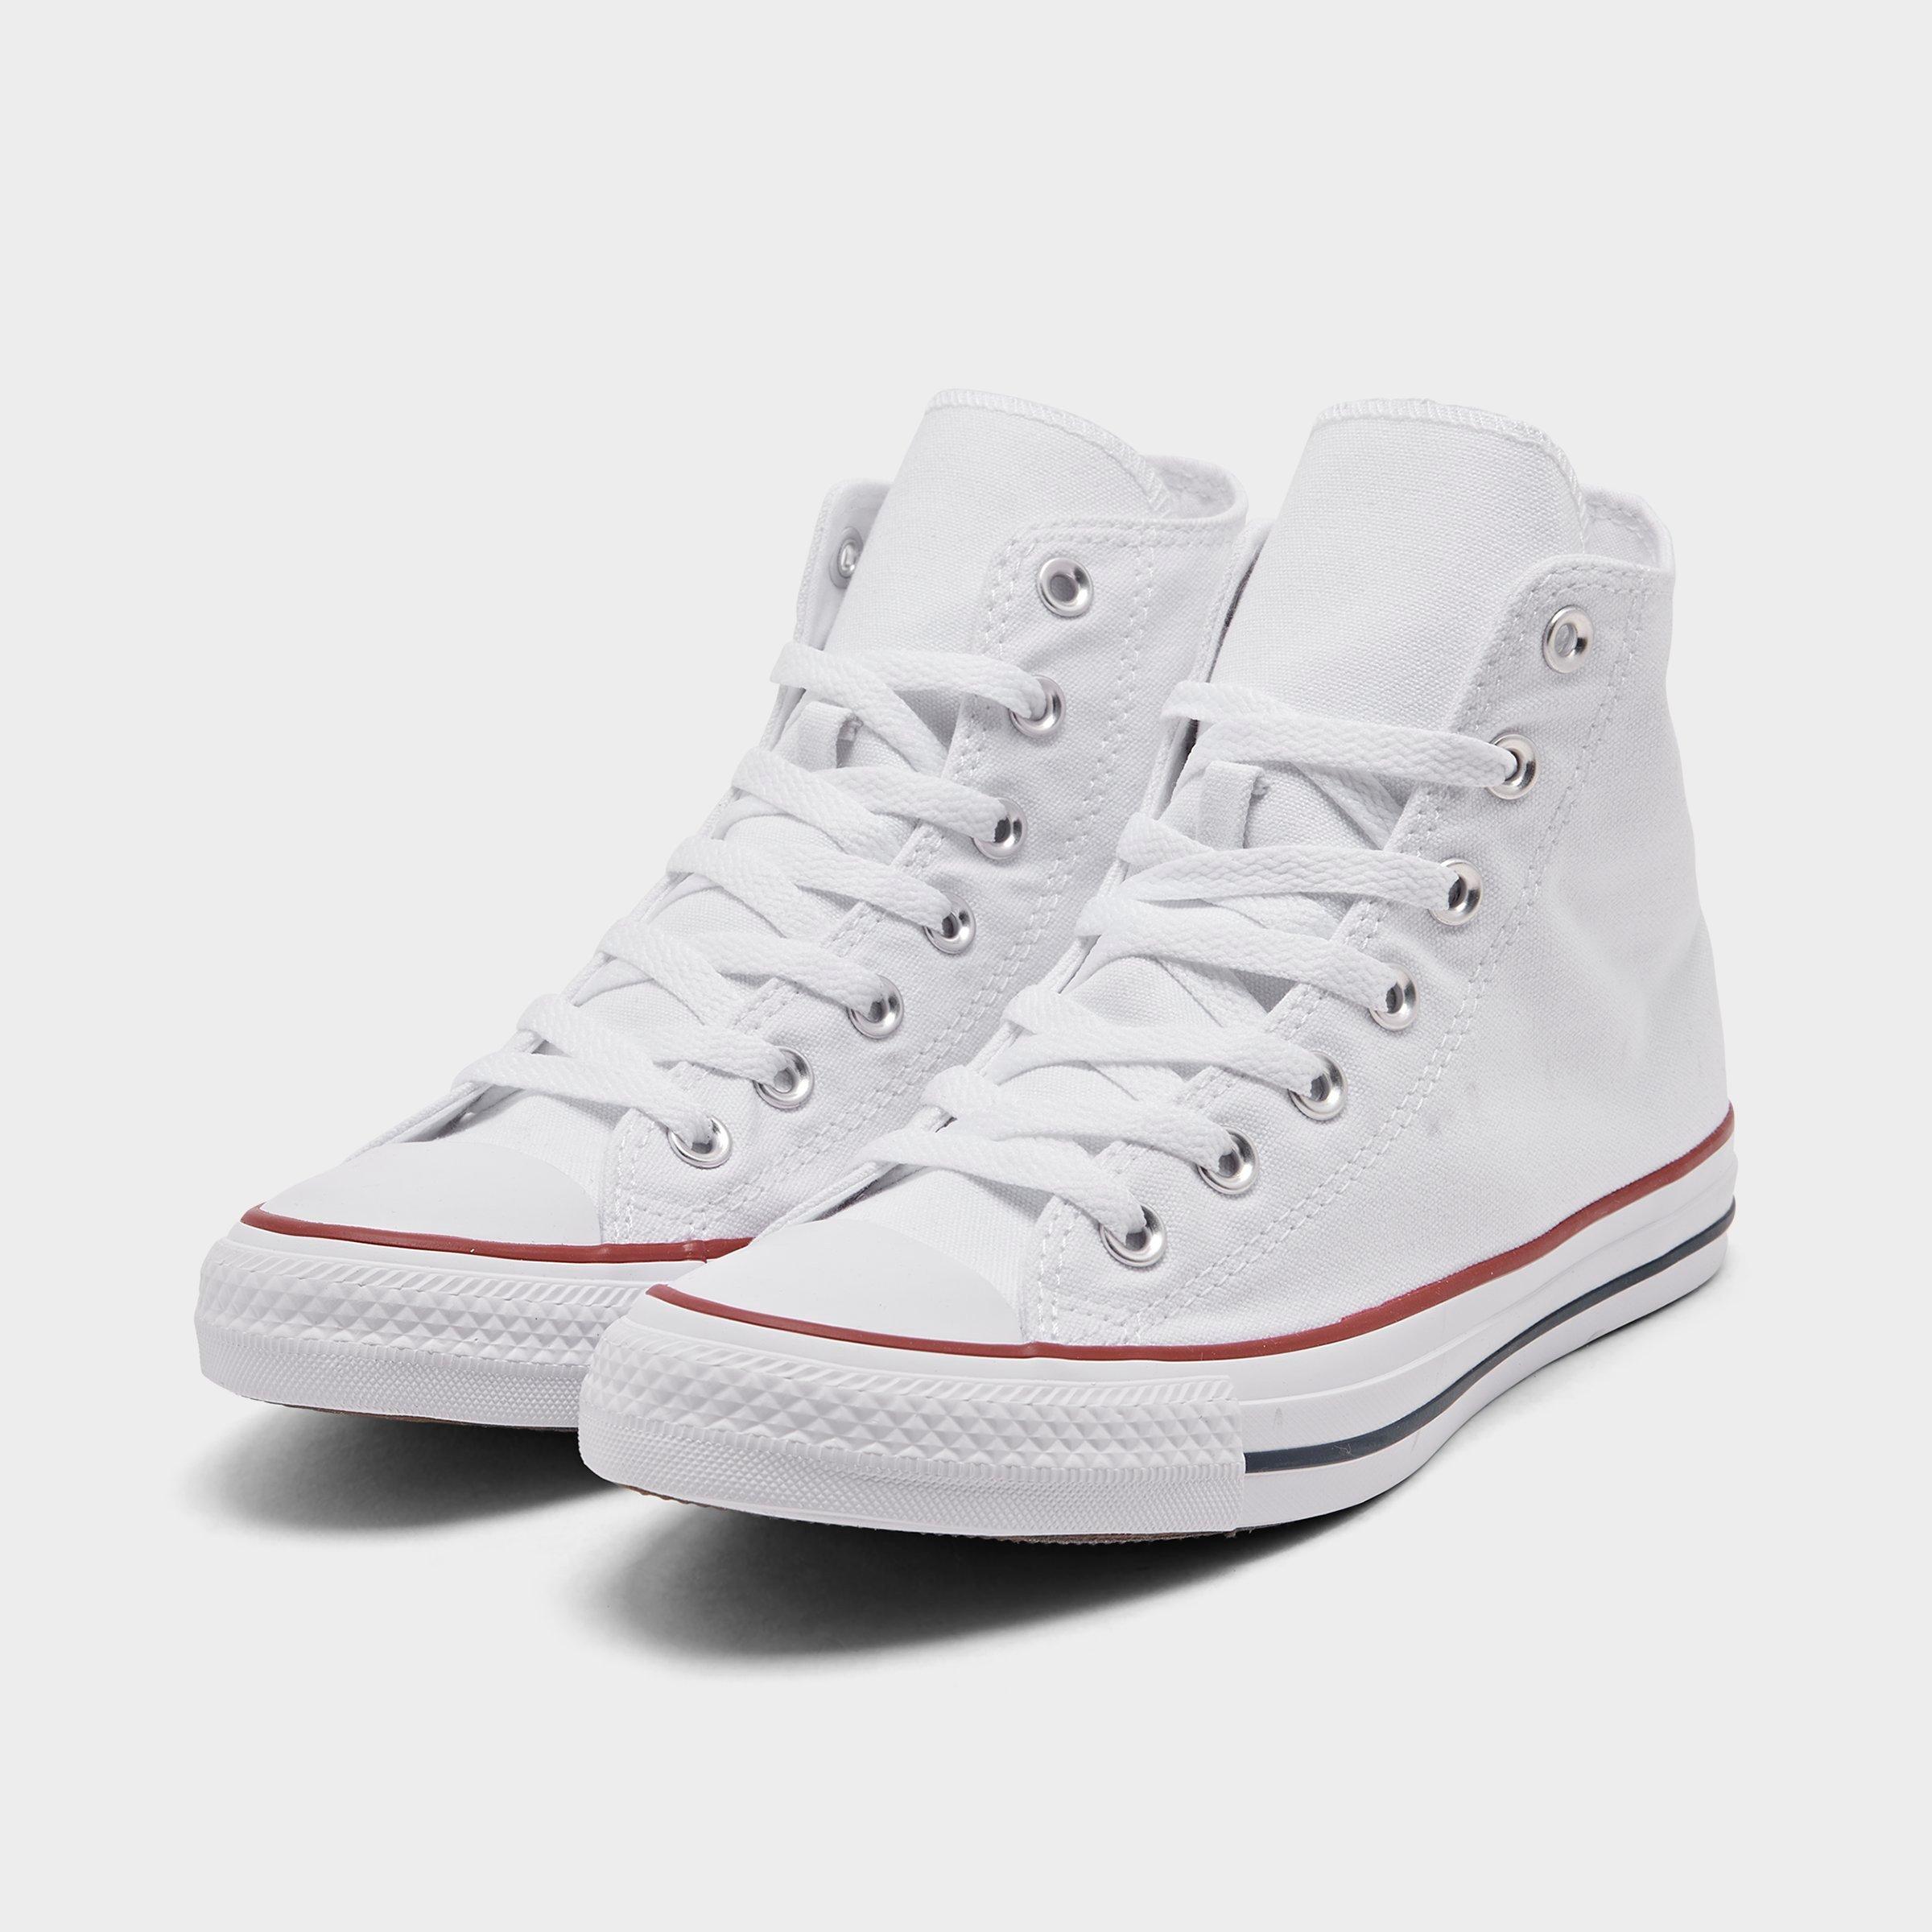 chuck taylor high top shoes